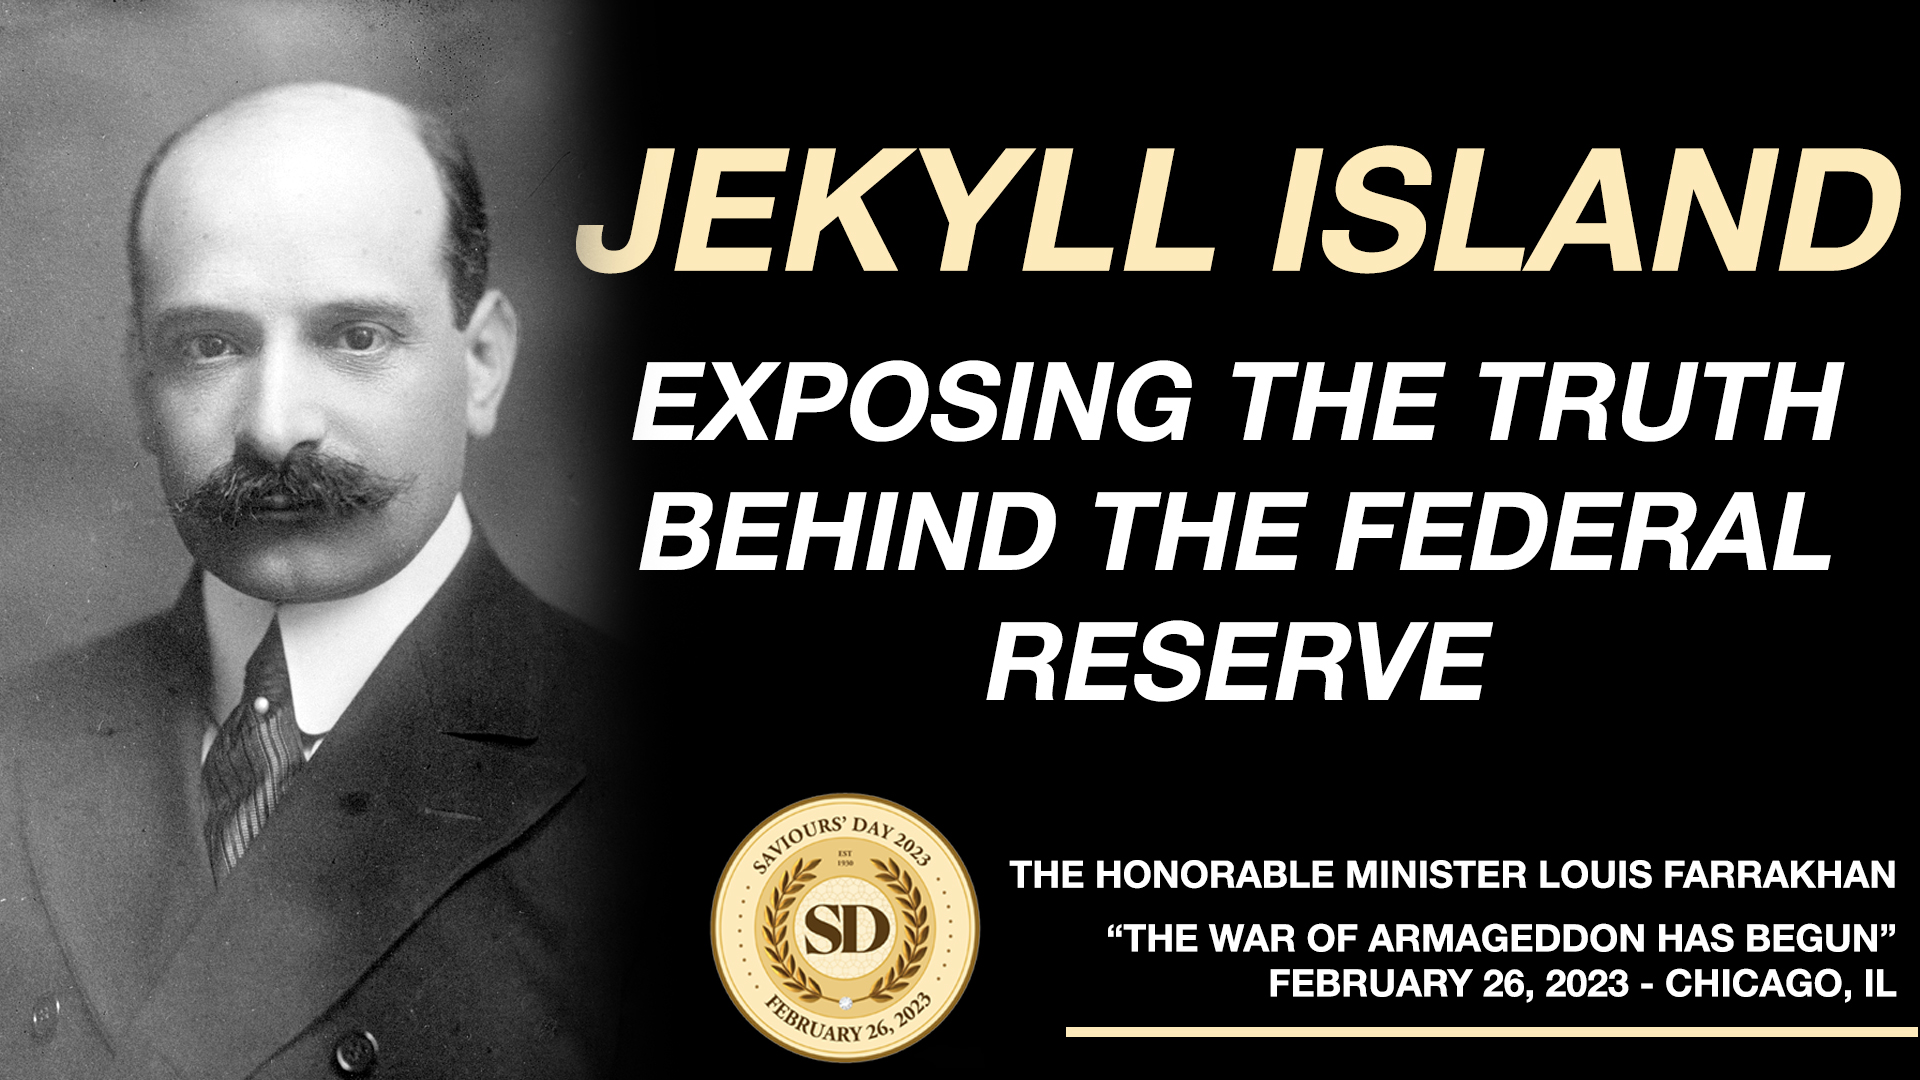 Jekyll Island: Exposing The Truth About The Federal Reserve